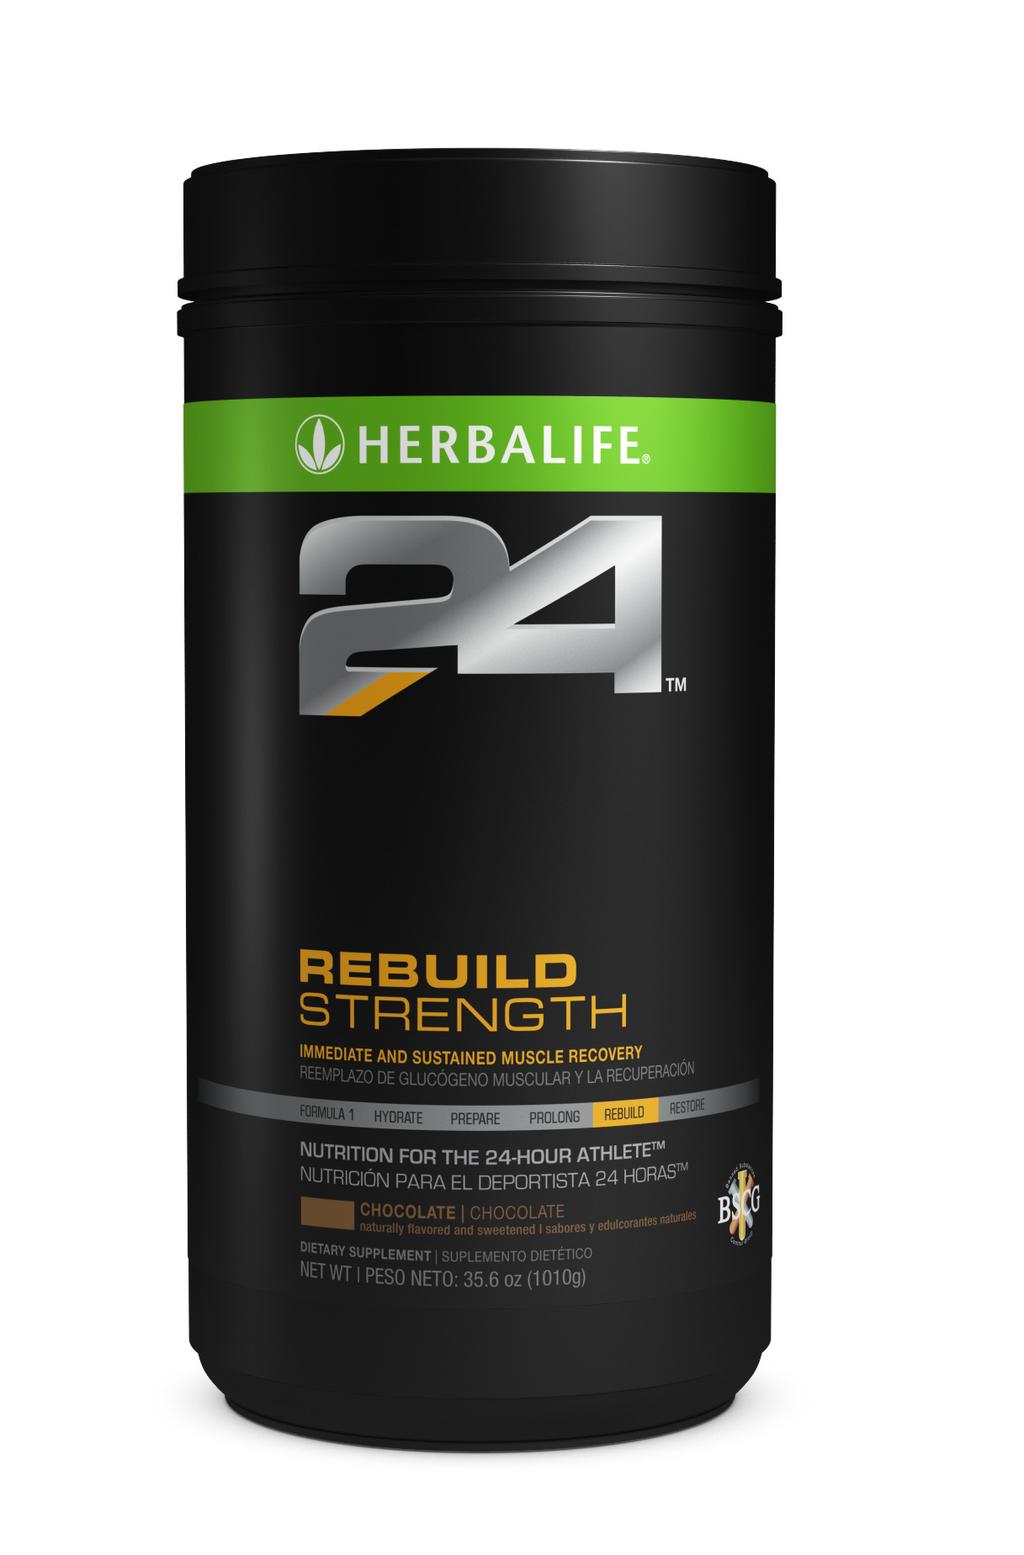 Rebuild STRENGTH IMMEDIATE AND SUSTAINED MUSCLE RECOVERY * Sustain muscle building with a shake that delivers a tri-core protein-amino blend of free amino acids, whey and casein proteins to help